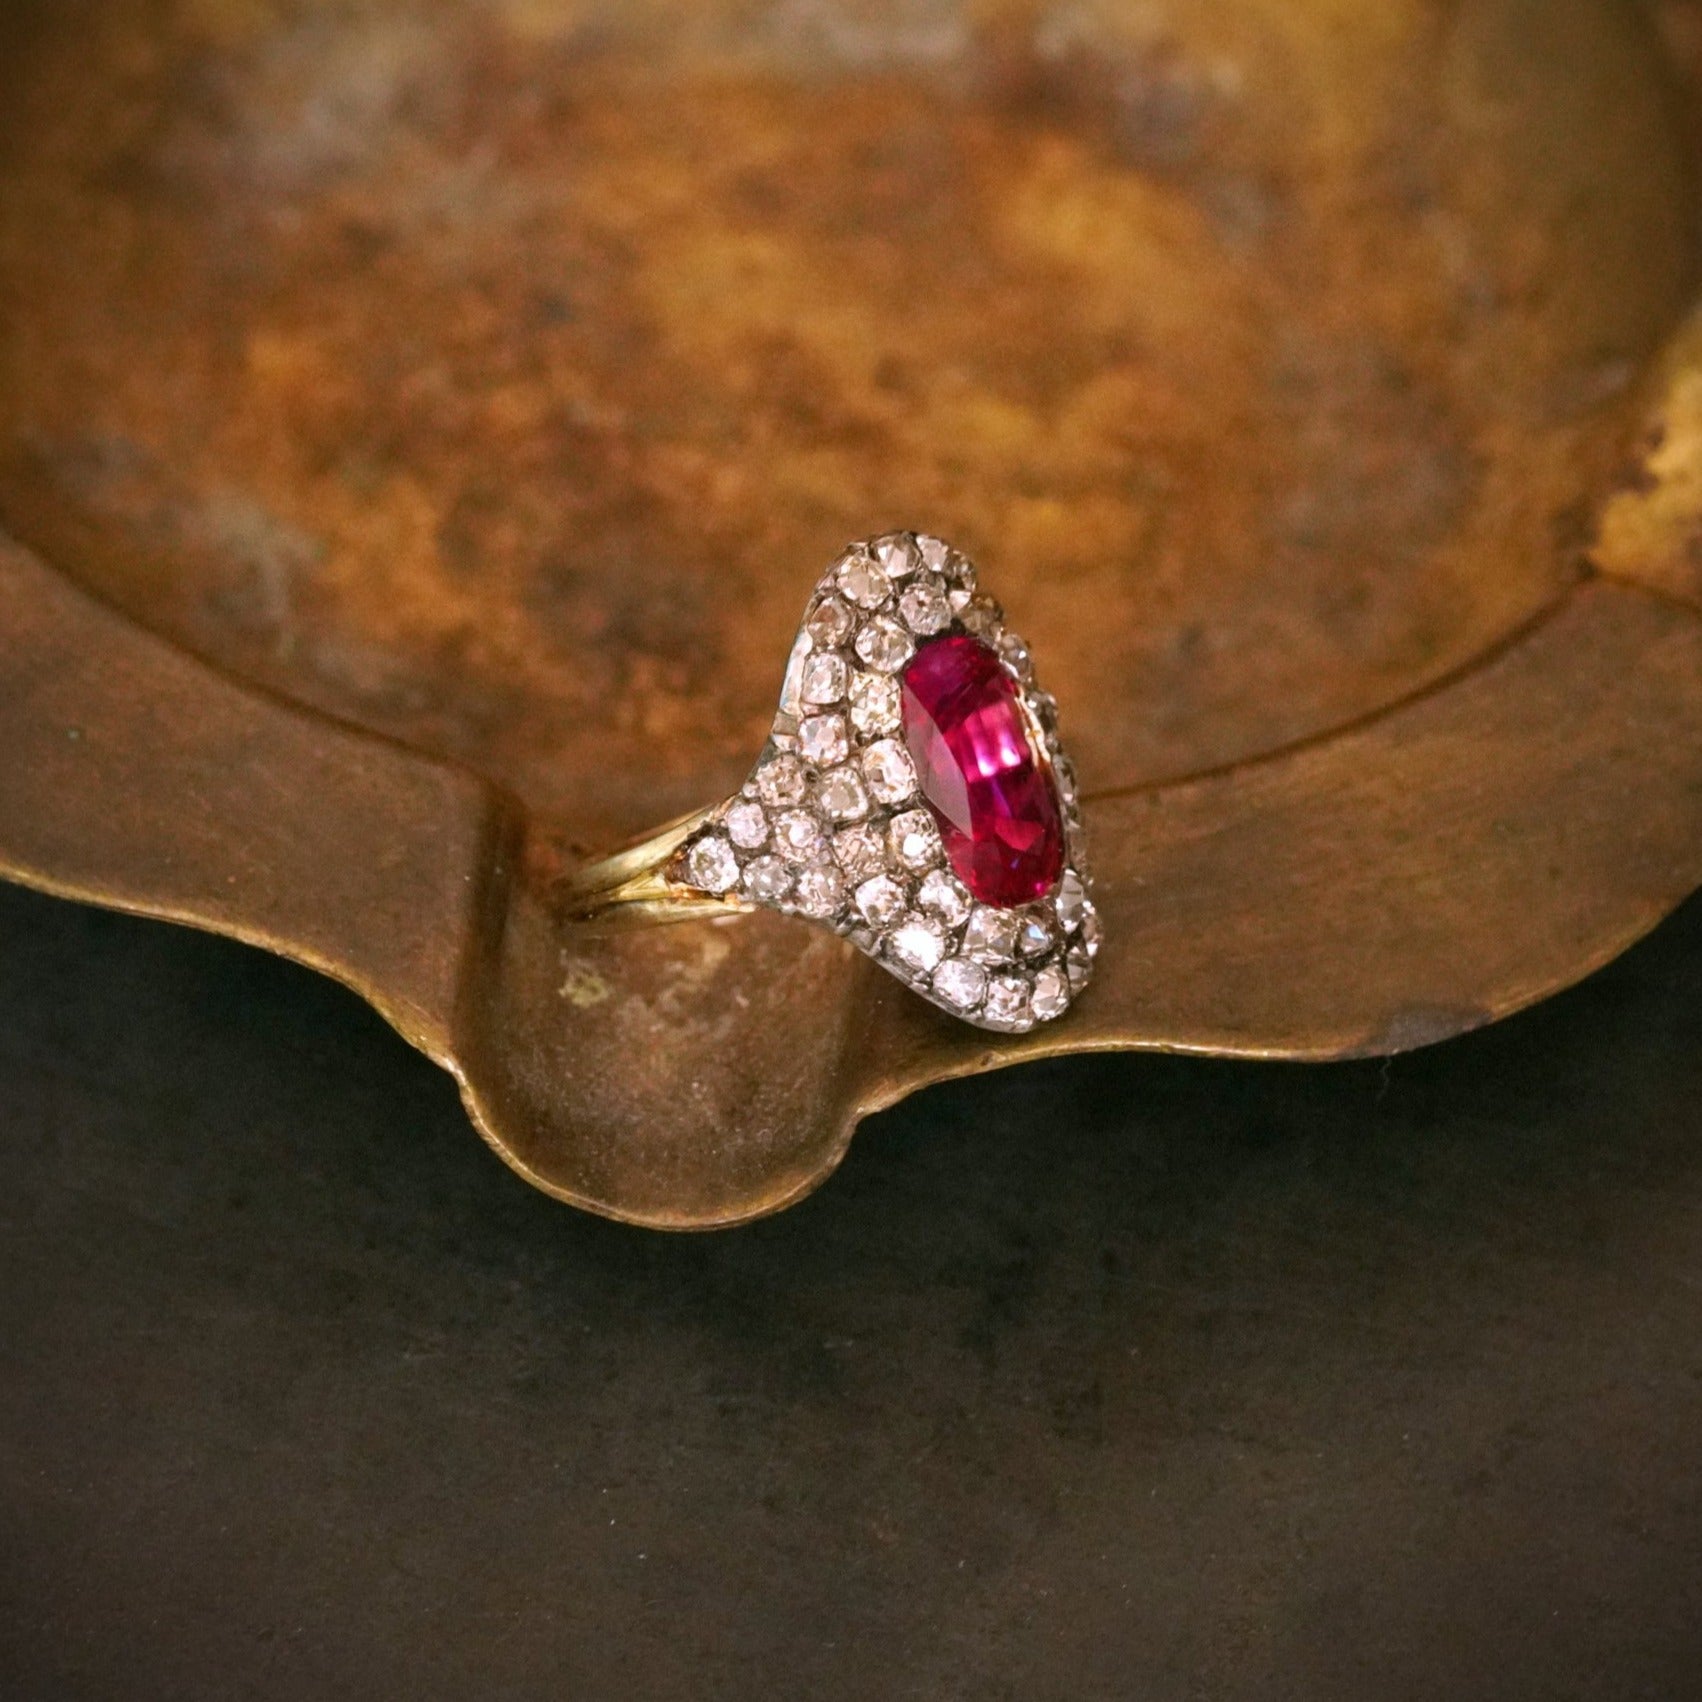 Jogani Gallery Exquisite Georgian Era Ring with a Glowing 3.12 CT No Heat Burmese Ruby and Lustrous 